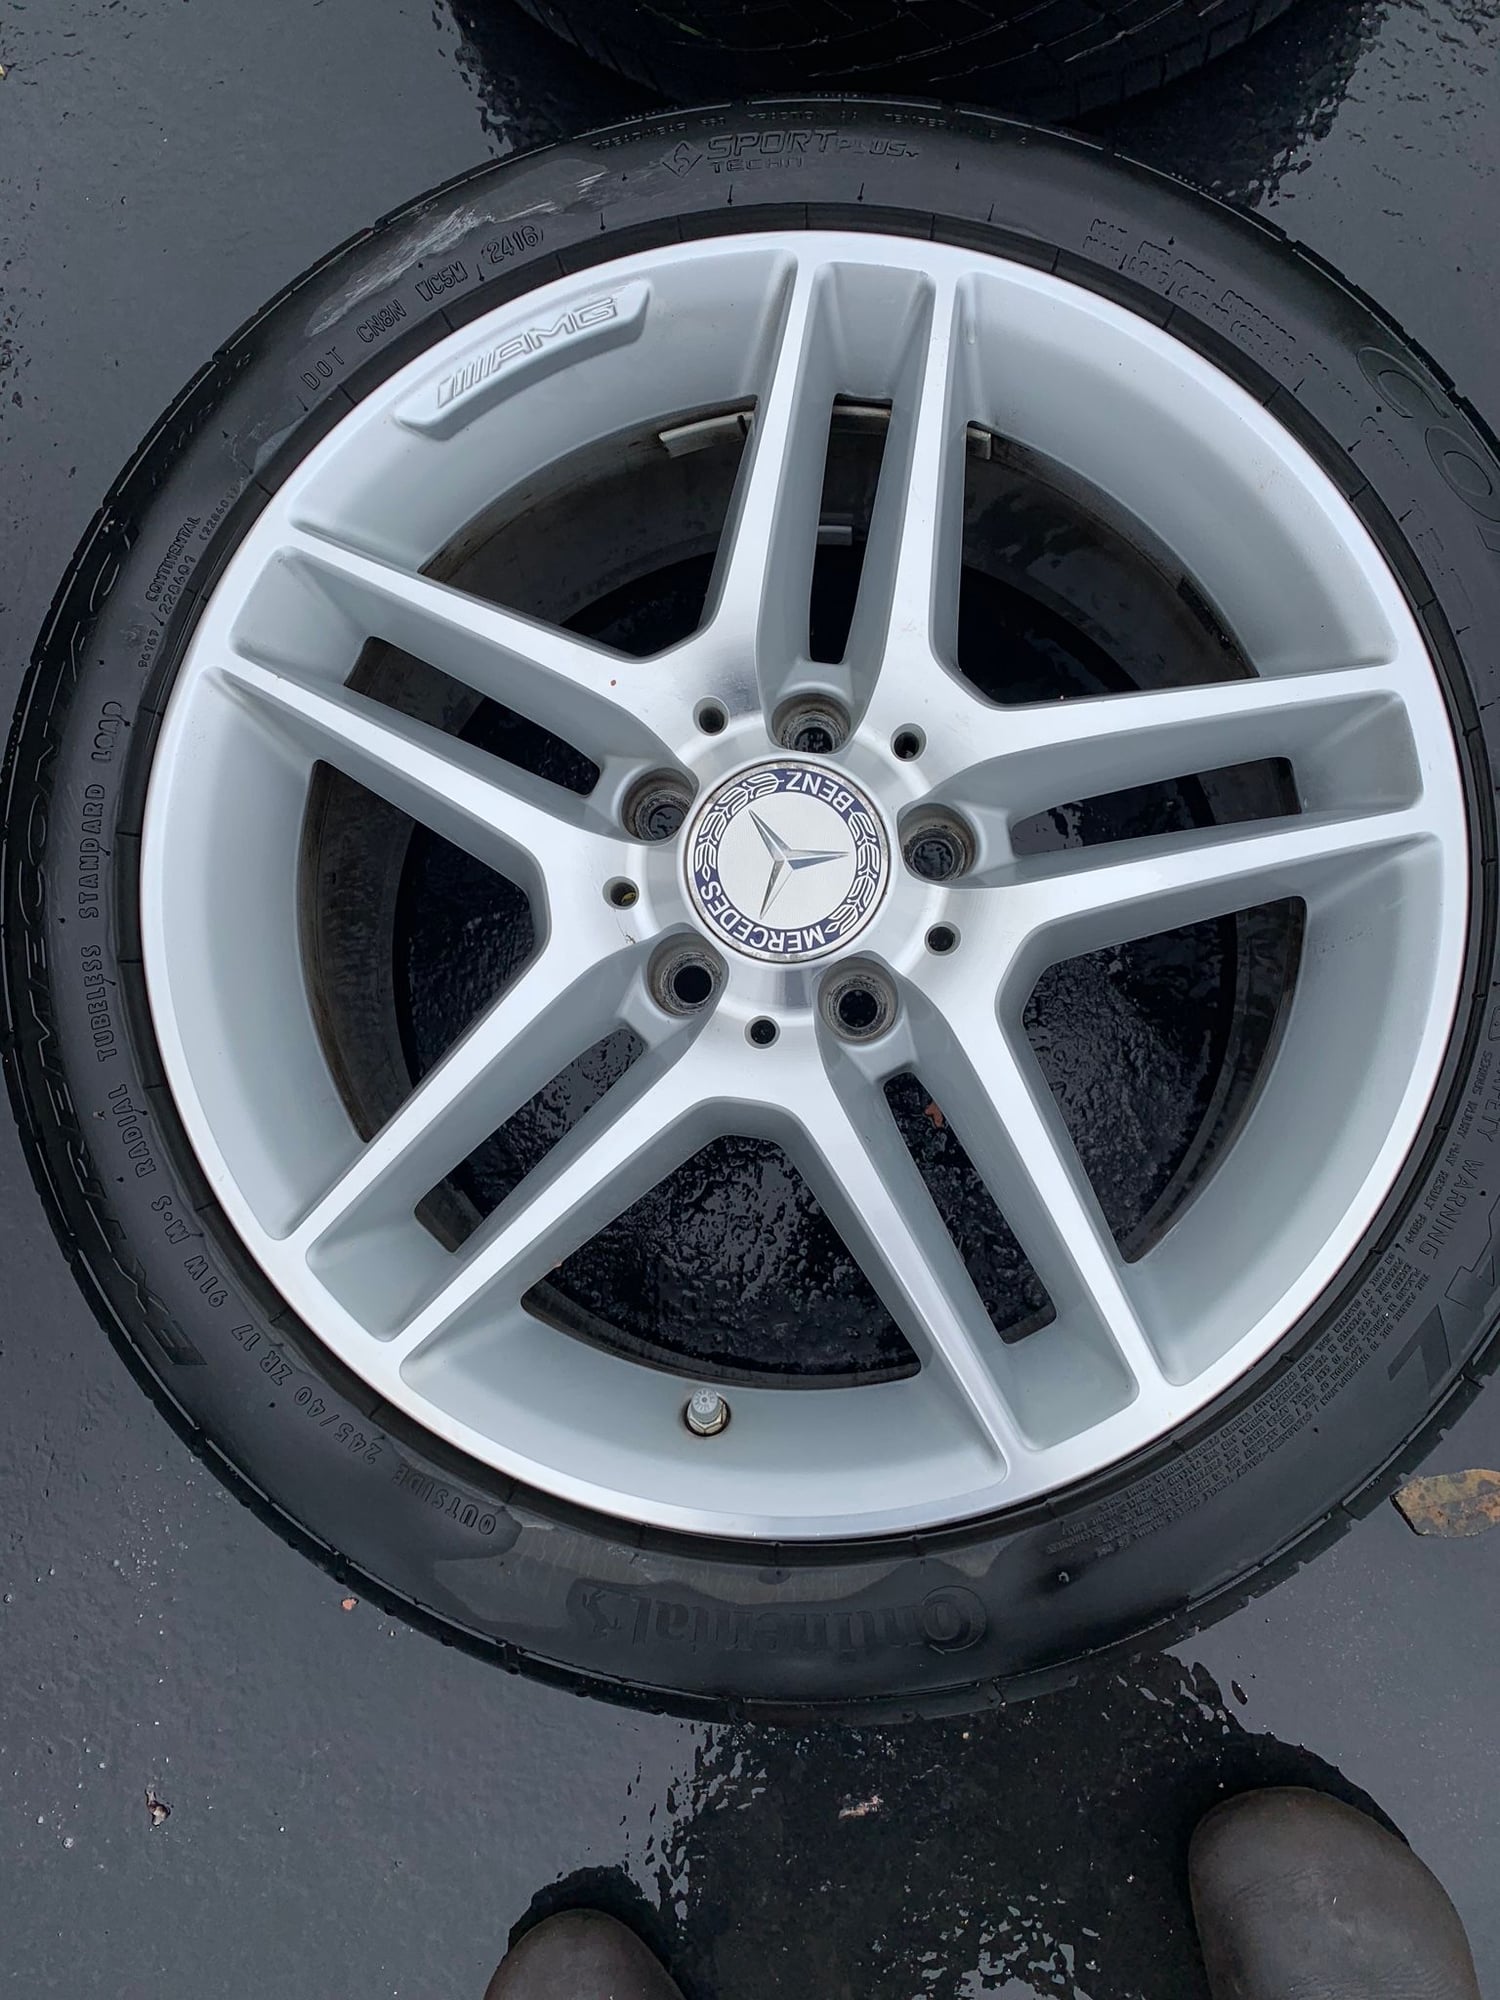 Wheels and Tires/Axles - 17in Mercedes AMG wheels - Used - 2010 to 2014 Mercedes-Benz C350 - 2011 to 2014 Mercedes-Benz C300 - Lindehurst, IL 60046, United States